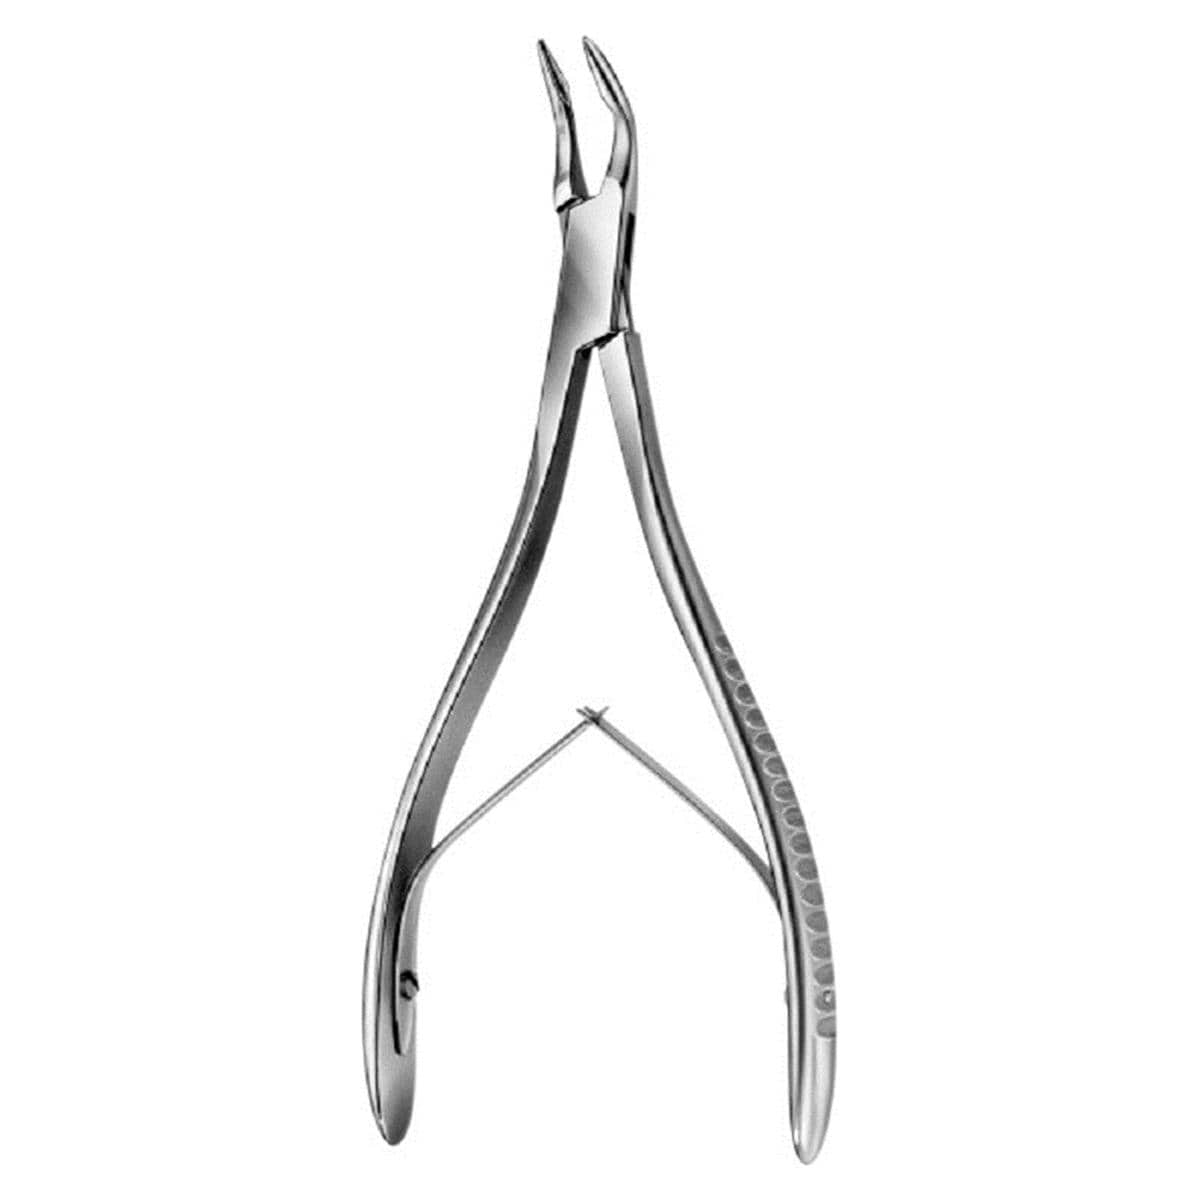 Pince gouge - FO413R, 15 cm